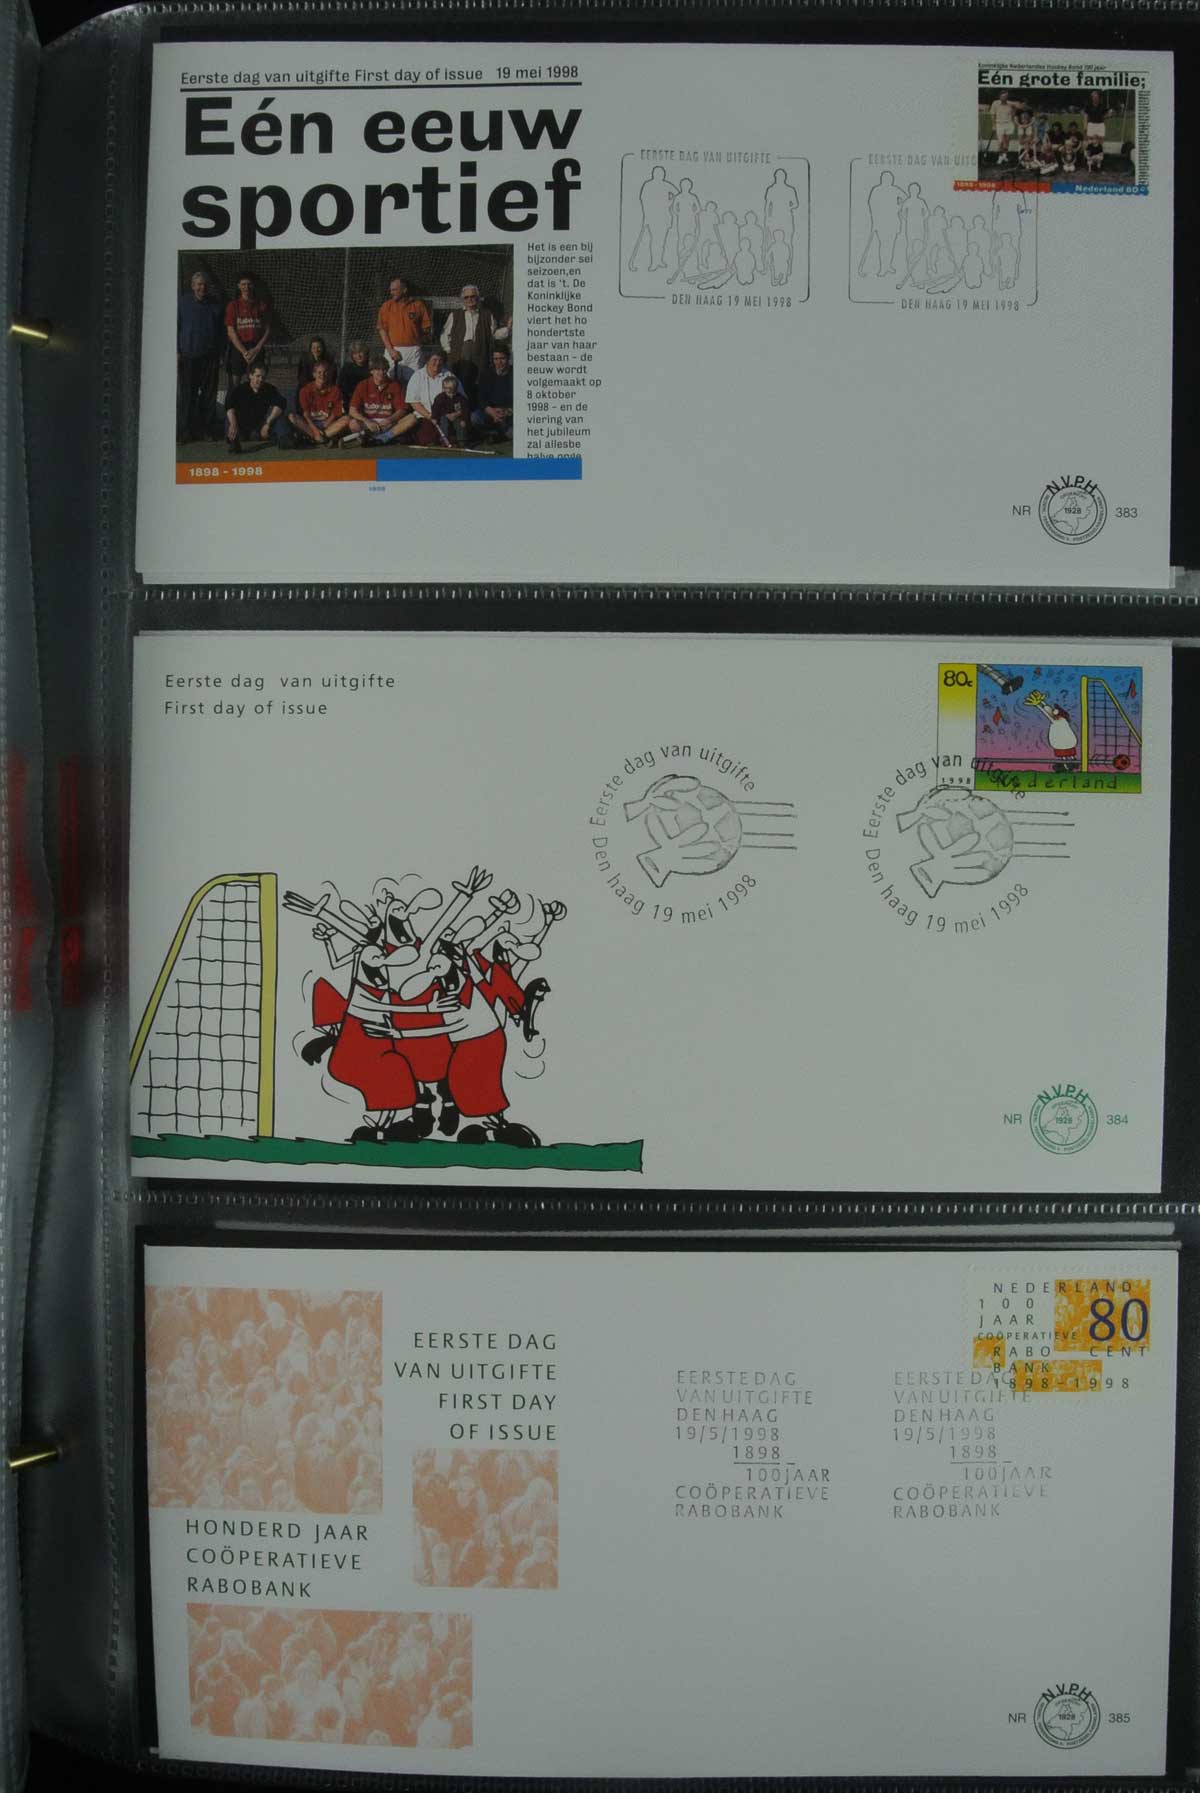 26836 017 - 26836 Netherlands FDC's 1995-2012.